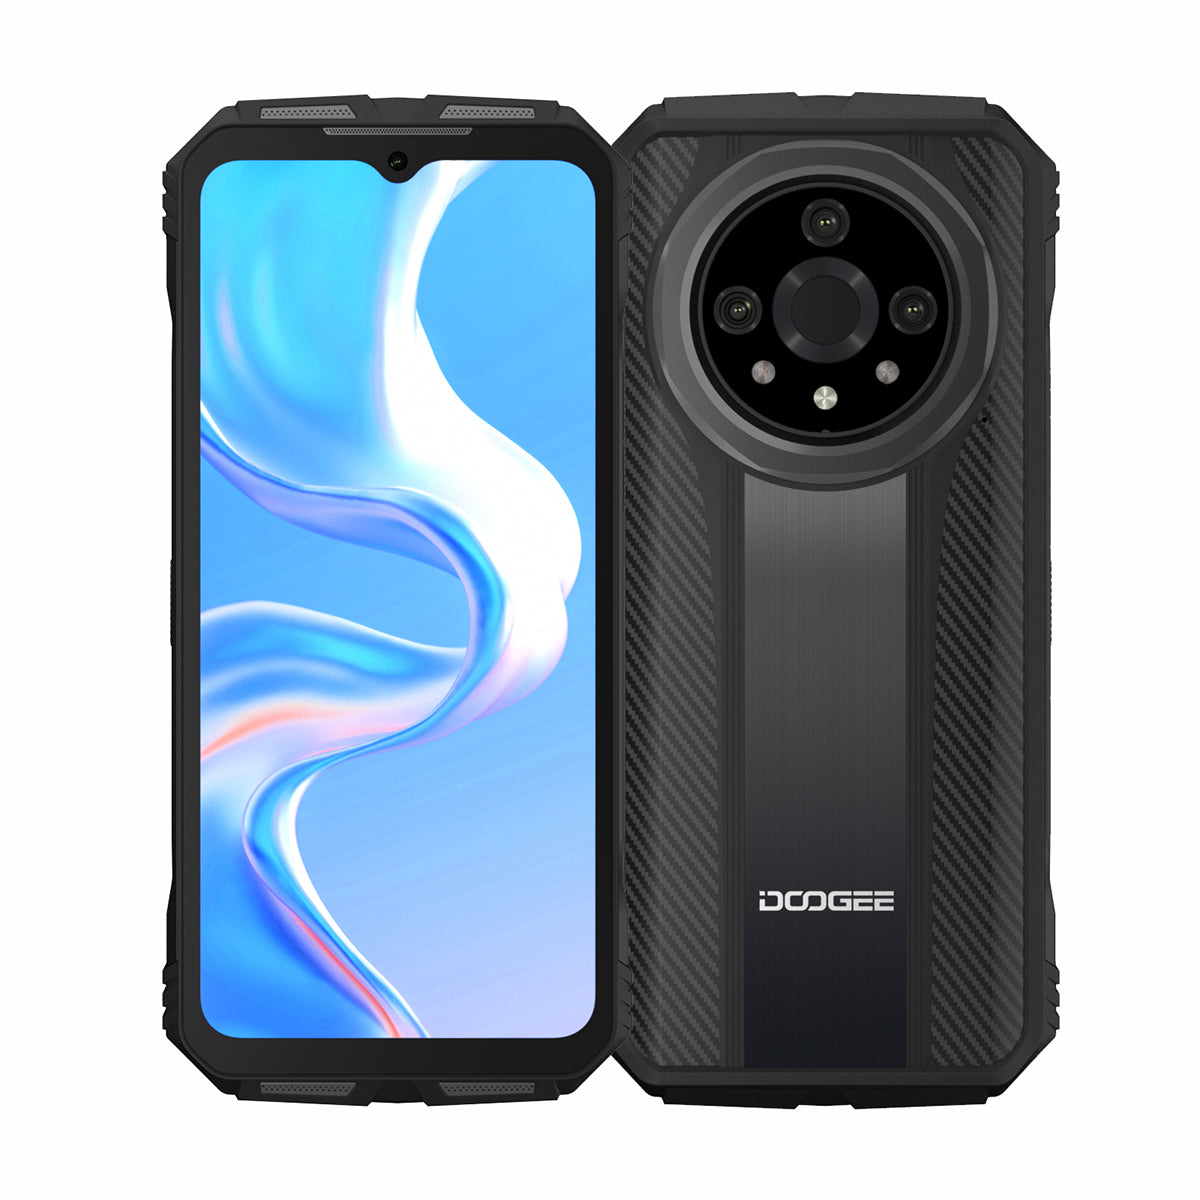 Doogee V30 will launch on December 22, specs & price revealed - Gizmochina